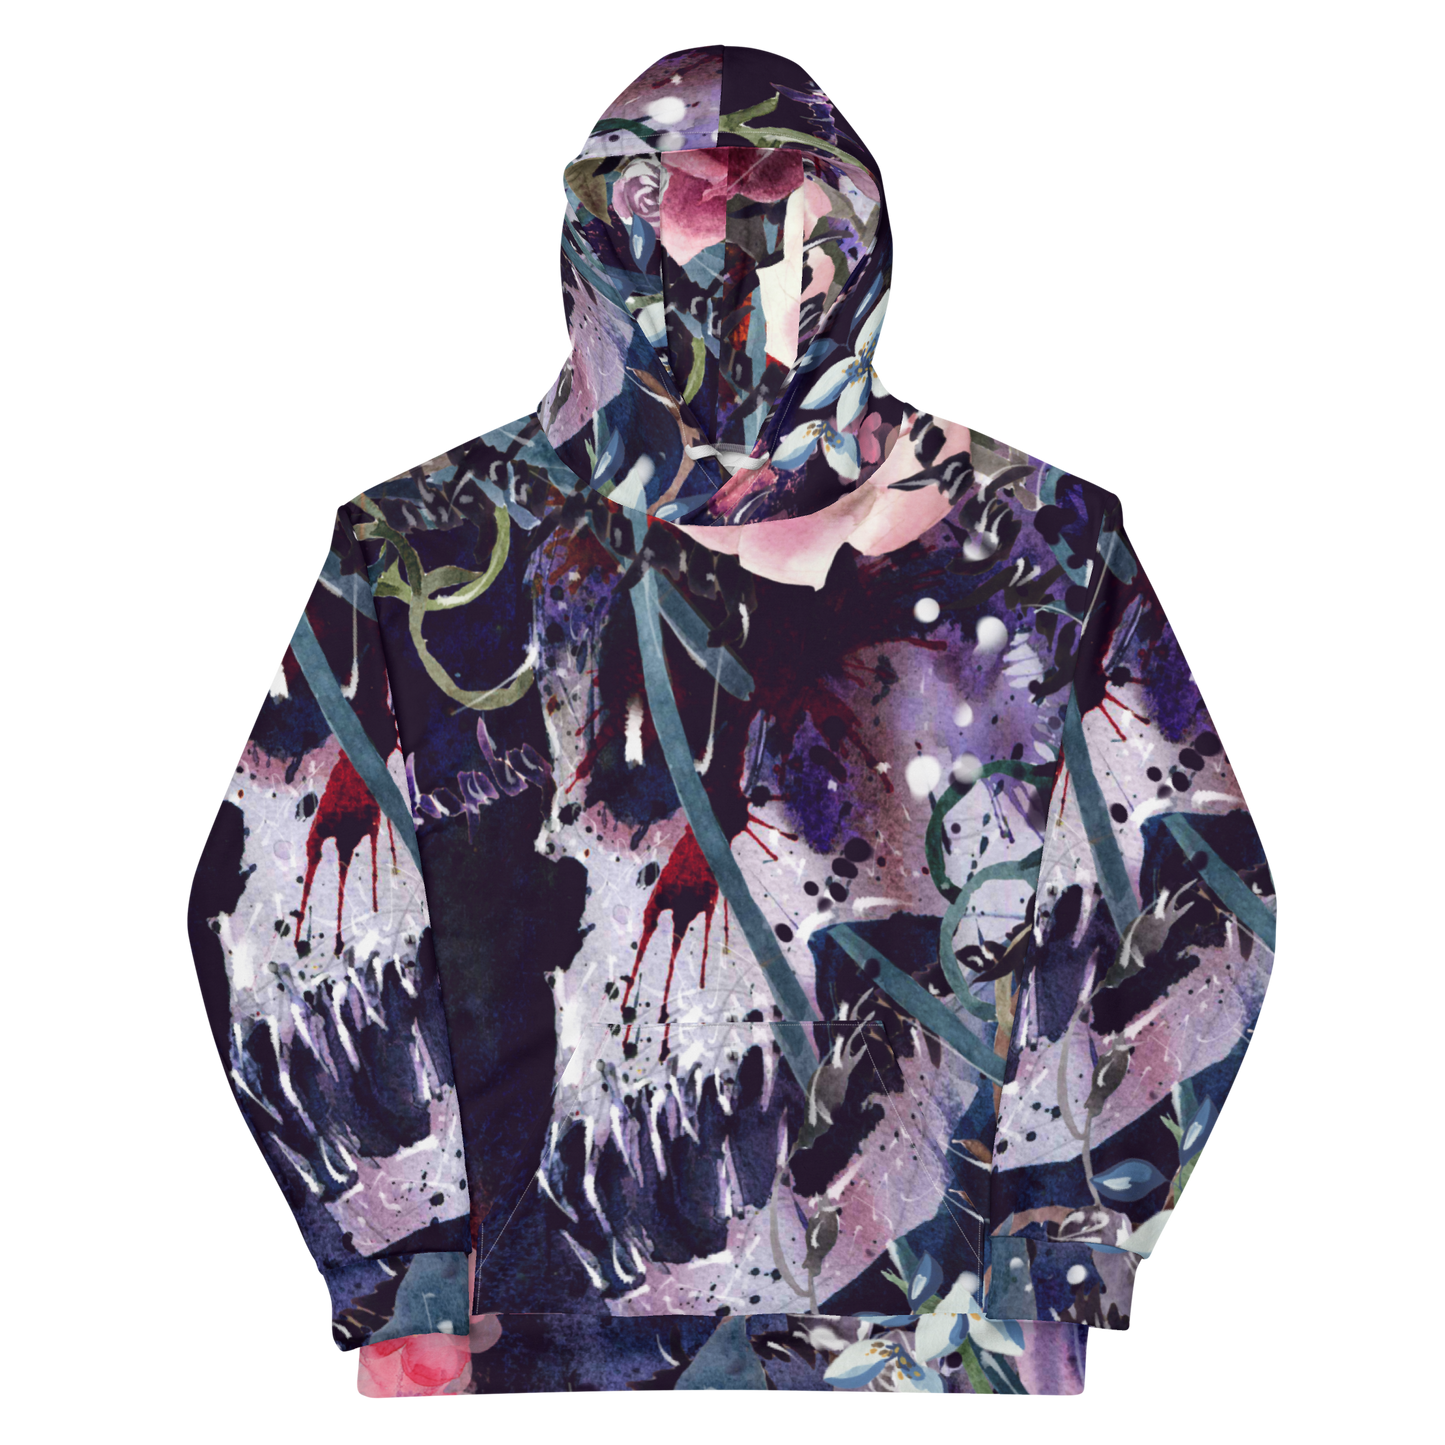 WATERCOLOR SKULL FLORAL ALL OVER PRINT UNISEX HOODIE